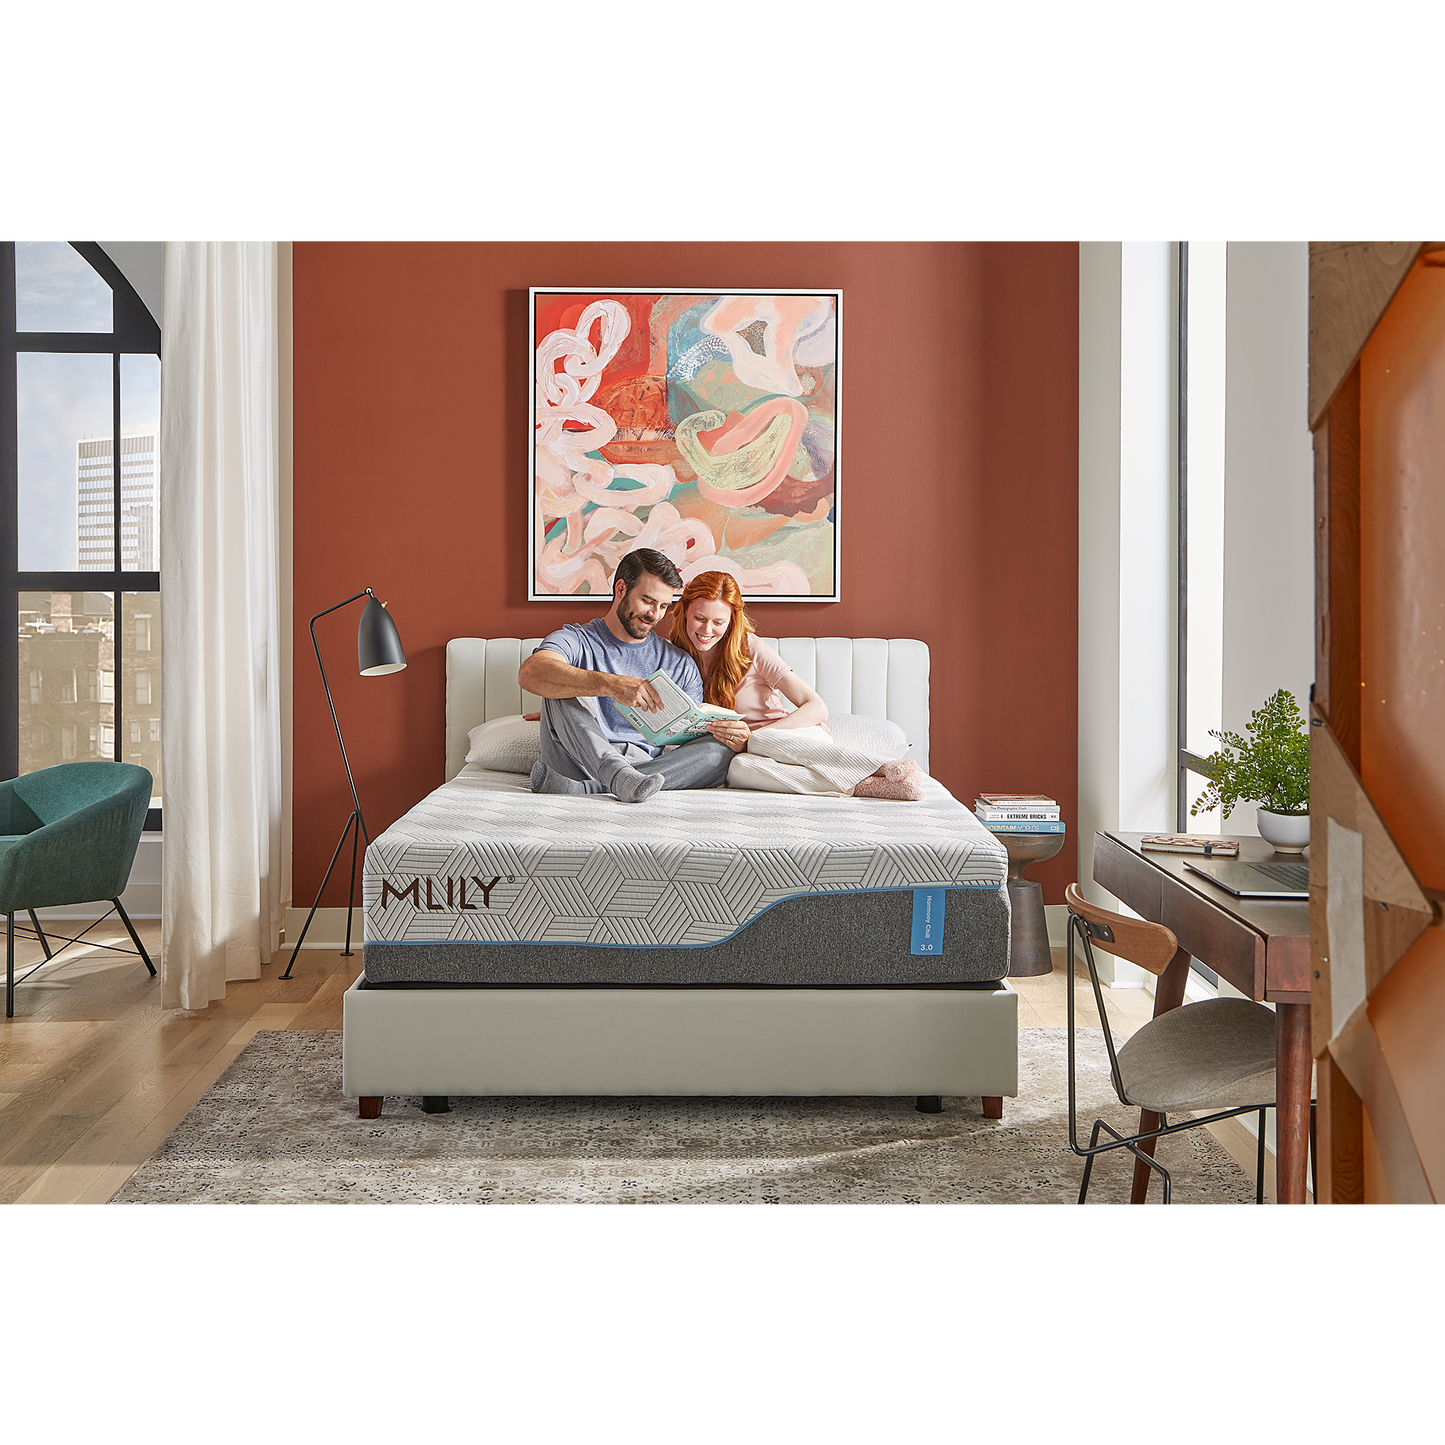 Harmony Chill 3.0 13" Memory Foam Mattress With Advanced Temperature Regulation Inside Of A Bedroom With A Man And Woman Sitting Upright